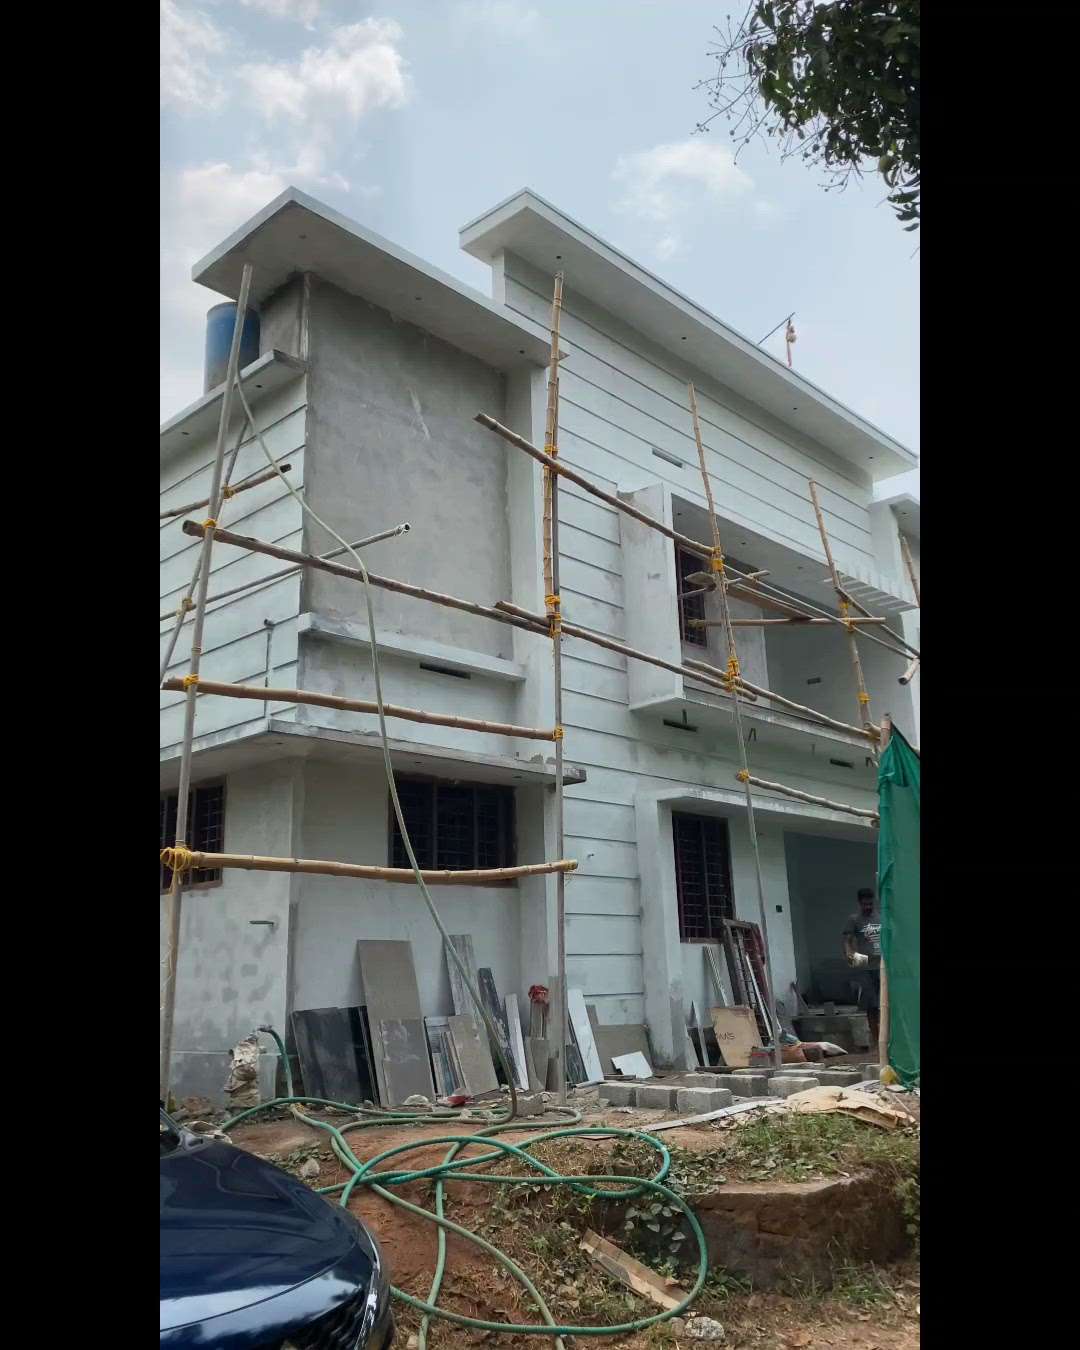 work under process at thrissur

 #newhomeconstruction  #Thrissur  #thrissurlive  #kerlahouse #keralastyle  #Contractor #HouseConstruction  #fullhome